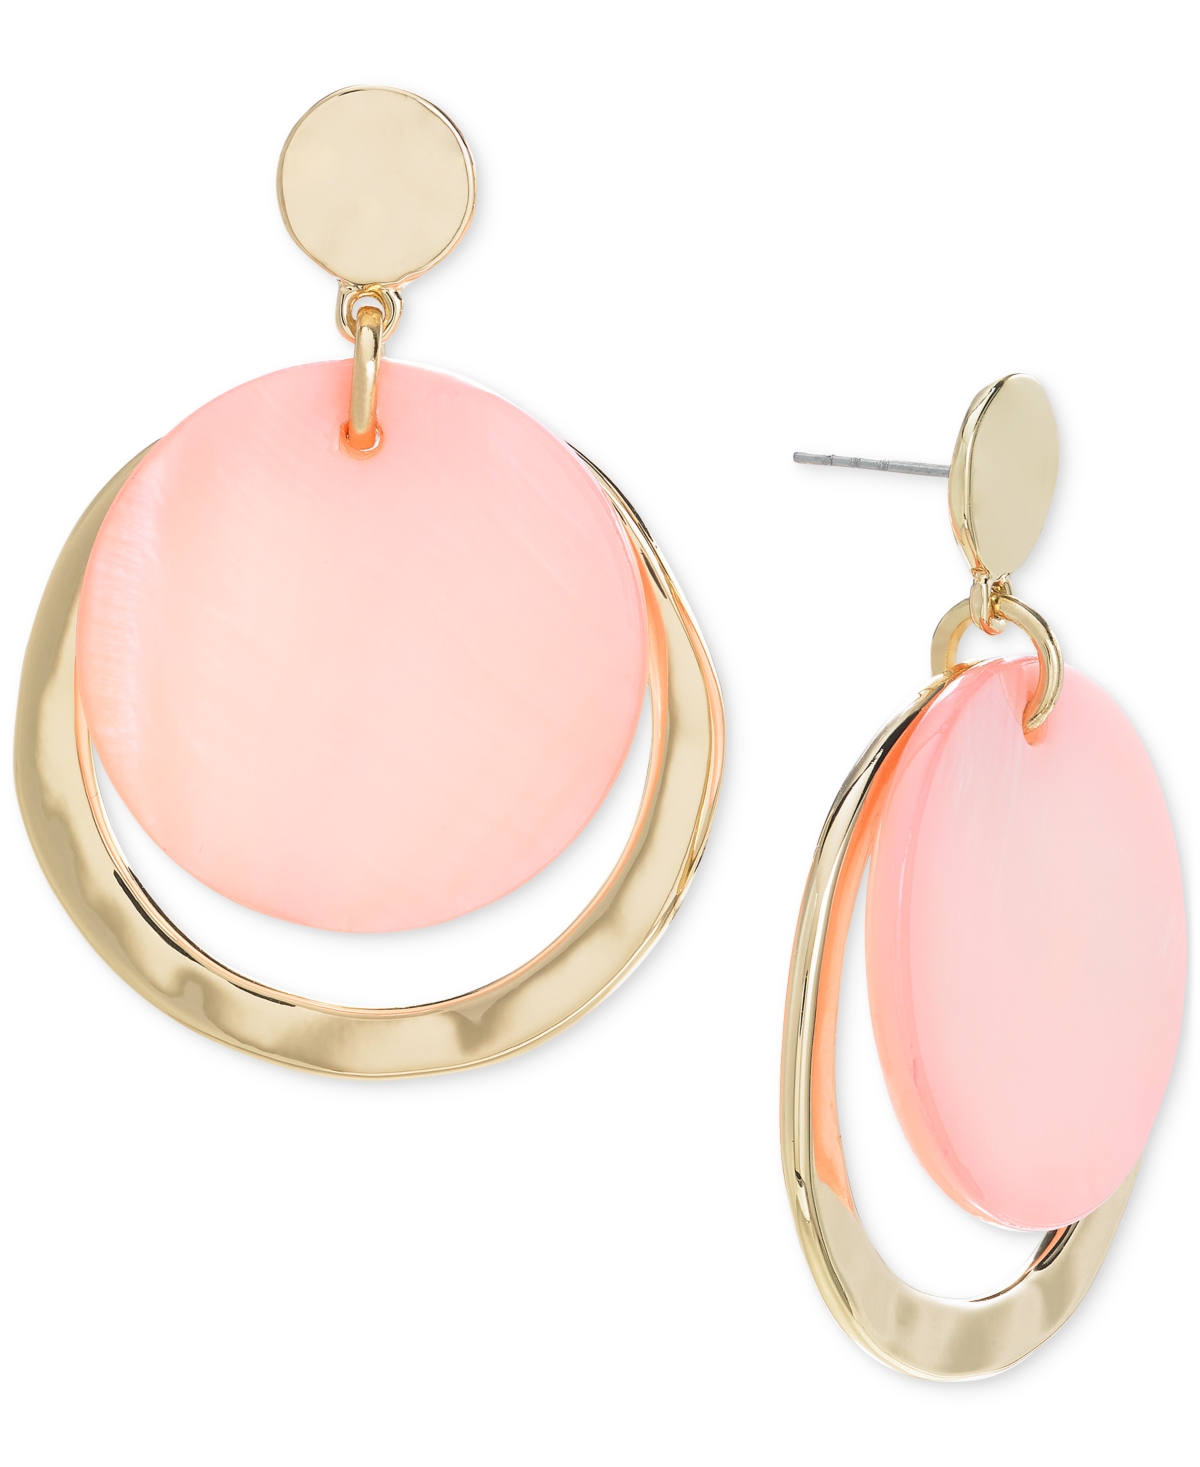 Gold-Tone Crescent Drop Earrings, Created for Macy's - Pink